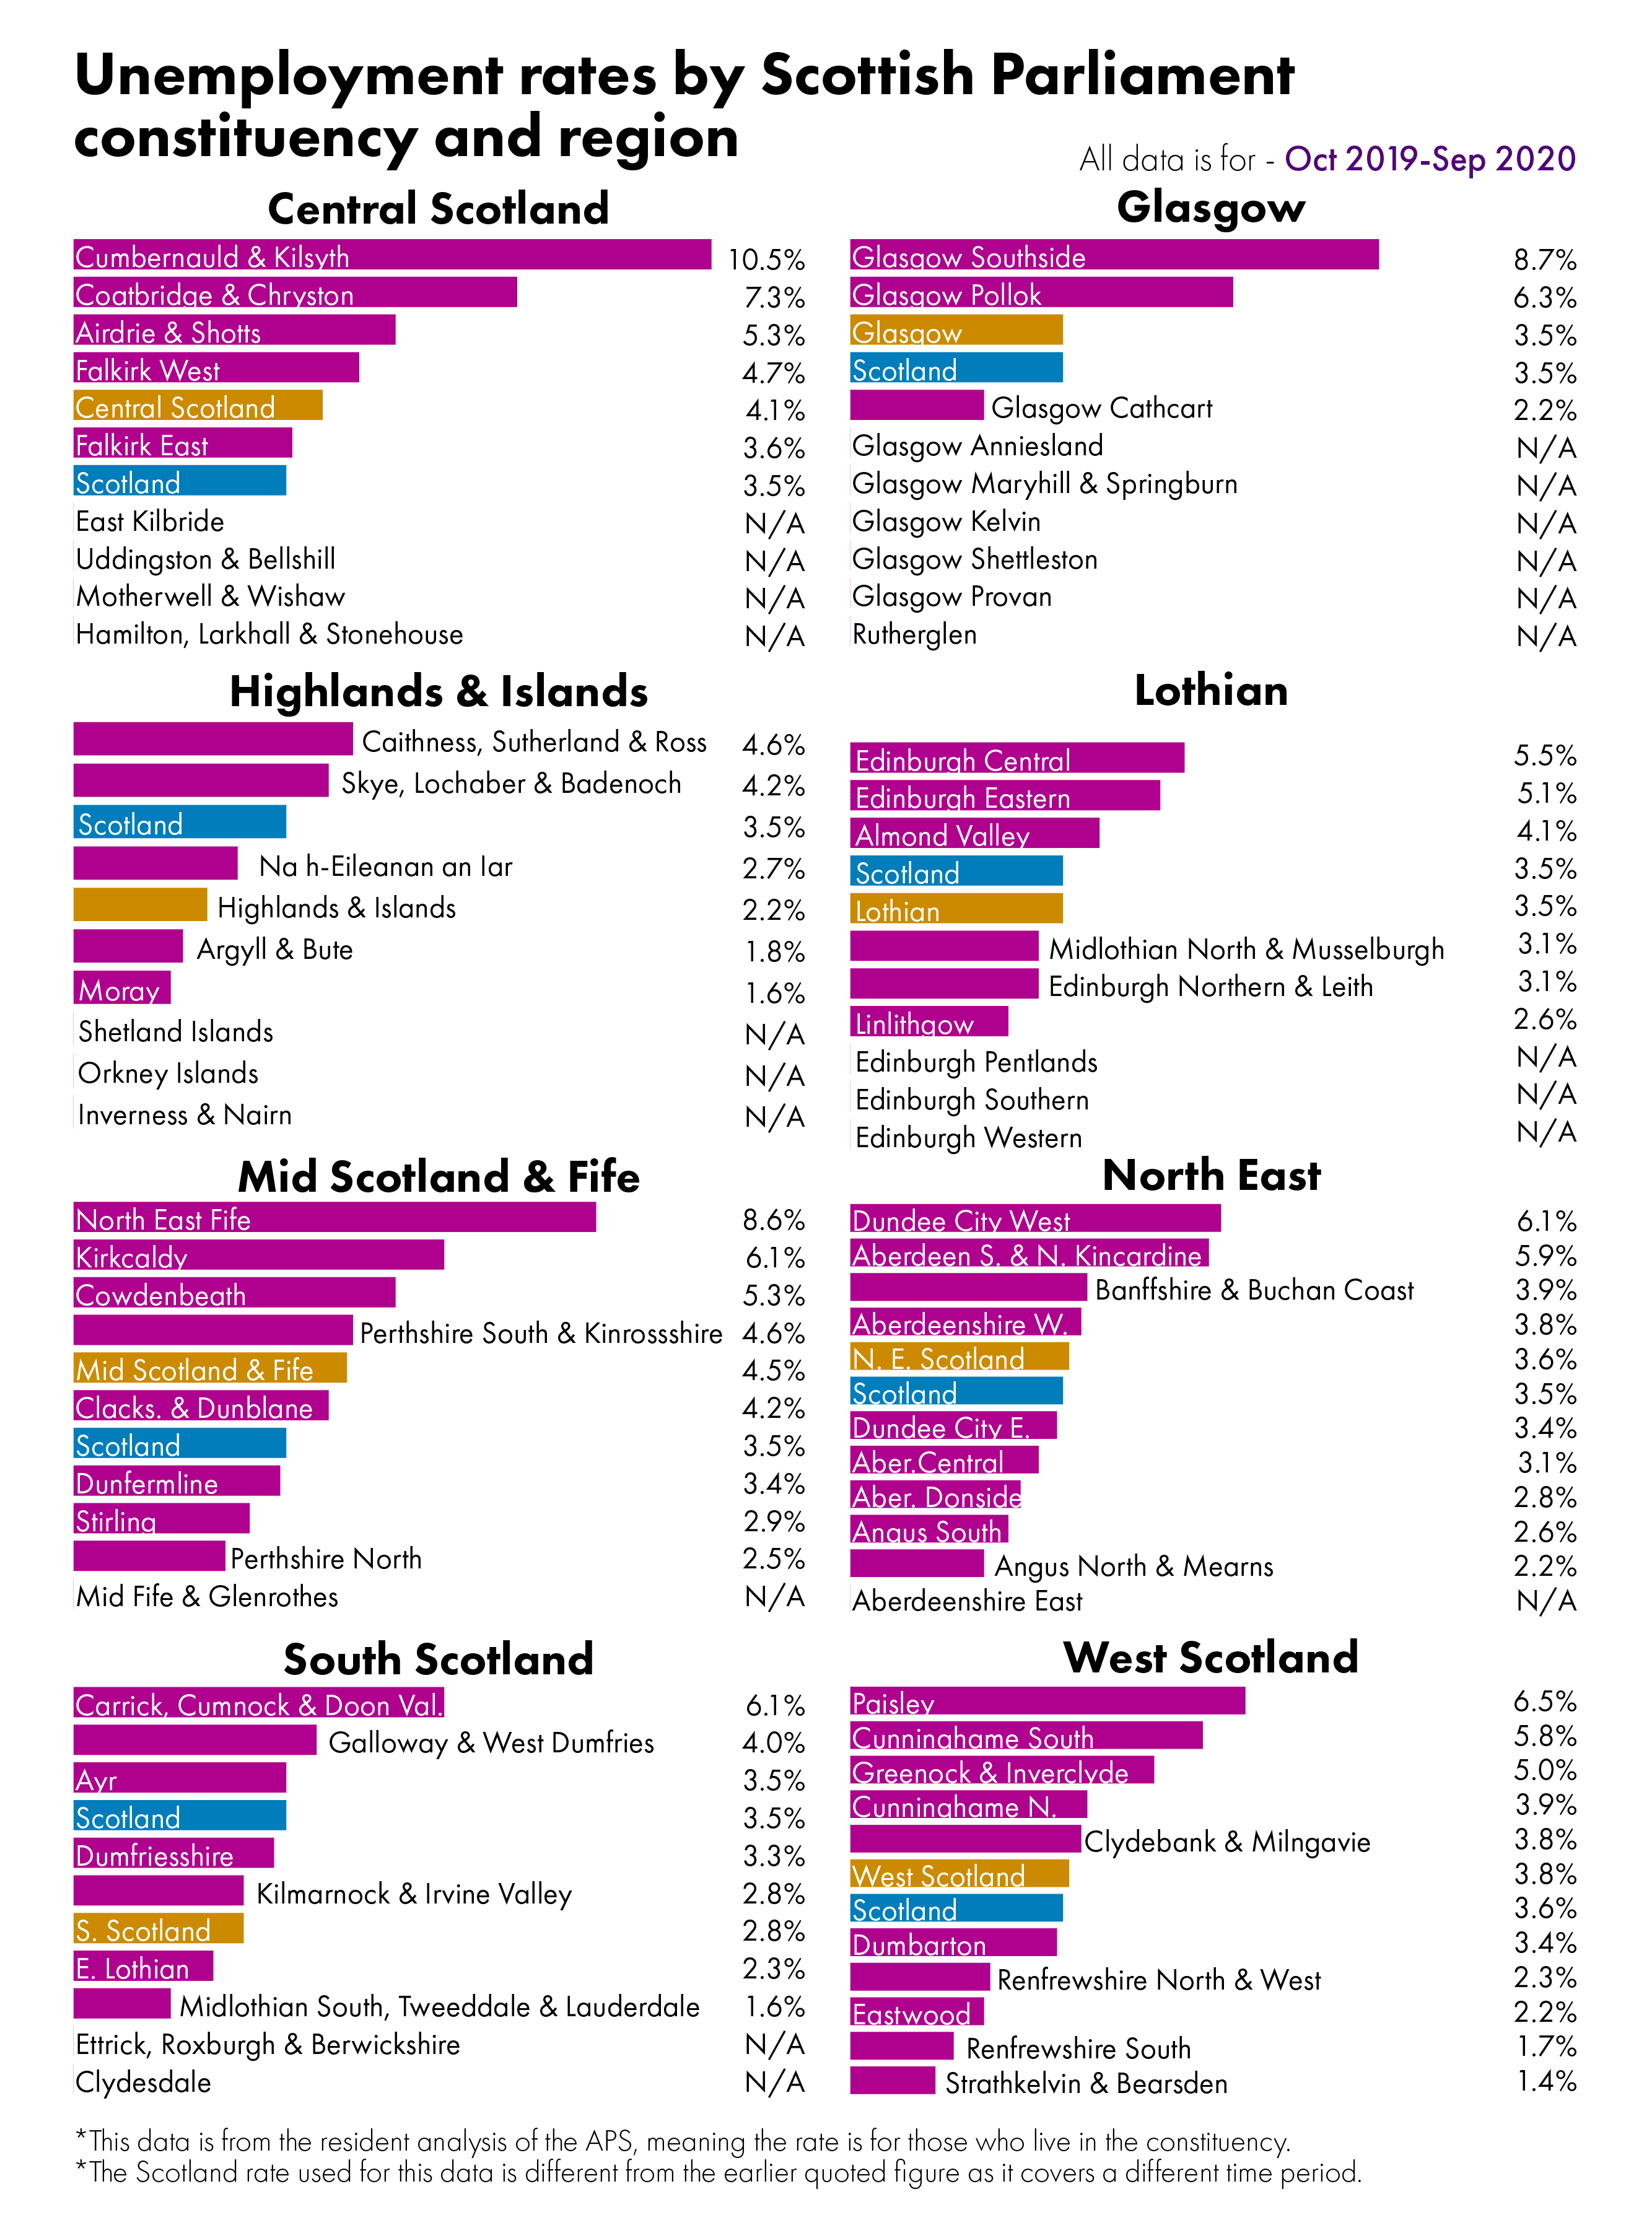 The data behind this image can be found on the Scottish parliament website.